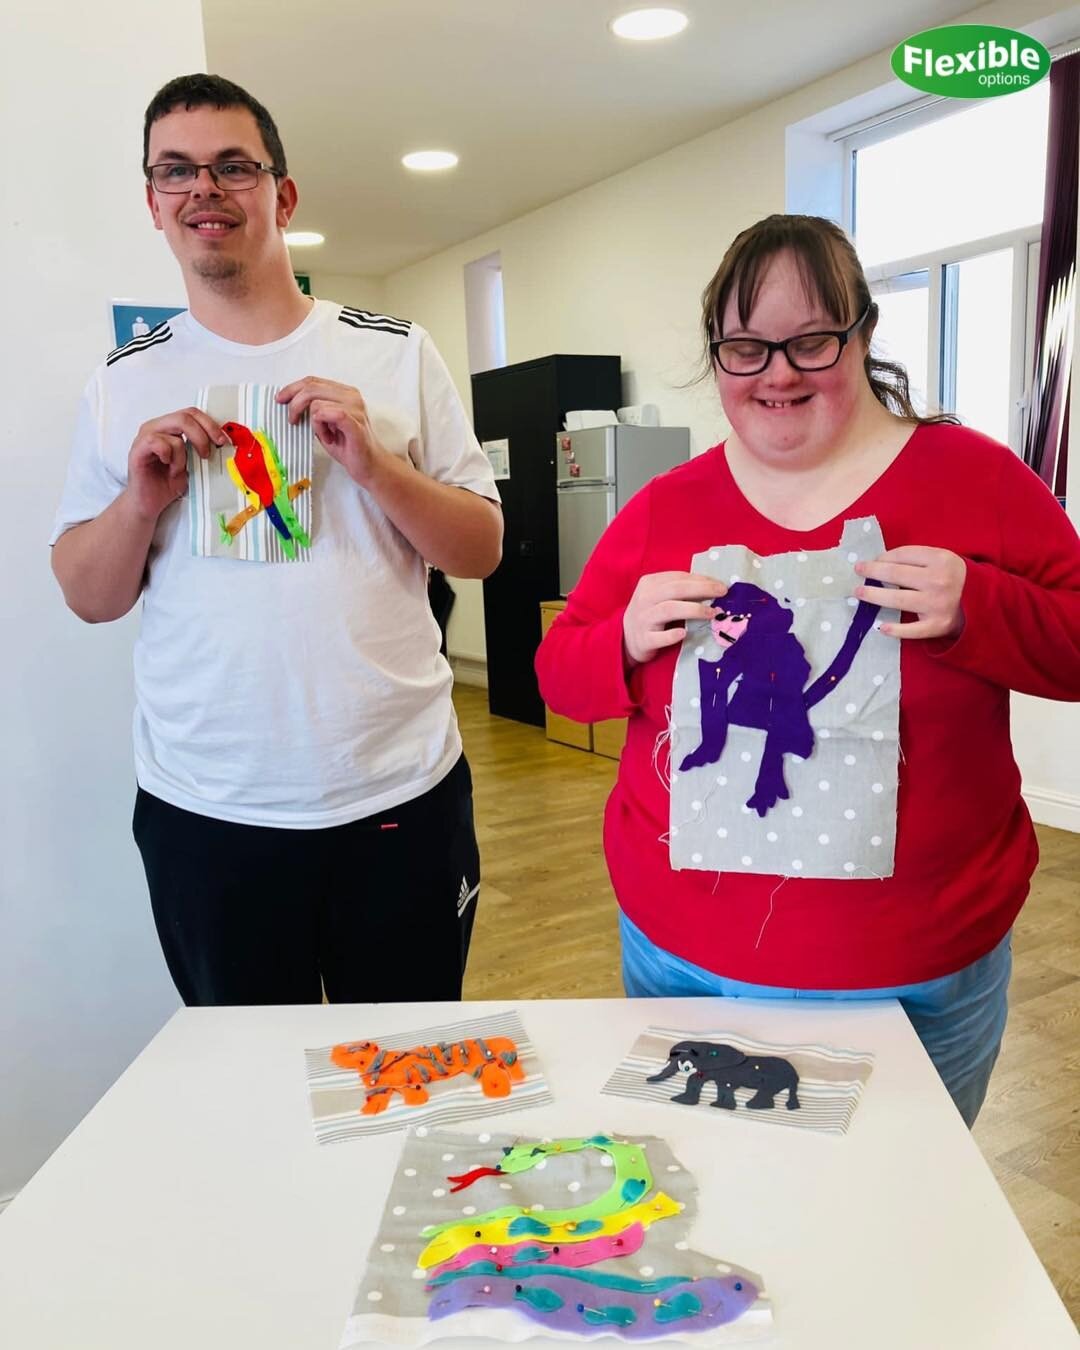 The animal life sewing project has been making some amazing progress over at Chepstow Rd. Here is Isabel and Brodie looking very happy about it all so far. Brilliant stuff.

#sewing #sewingproject #sewingpattern #sewingclasses #learningdisabilites